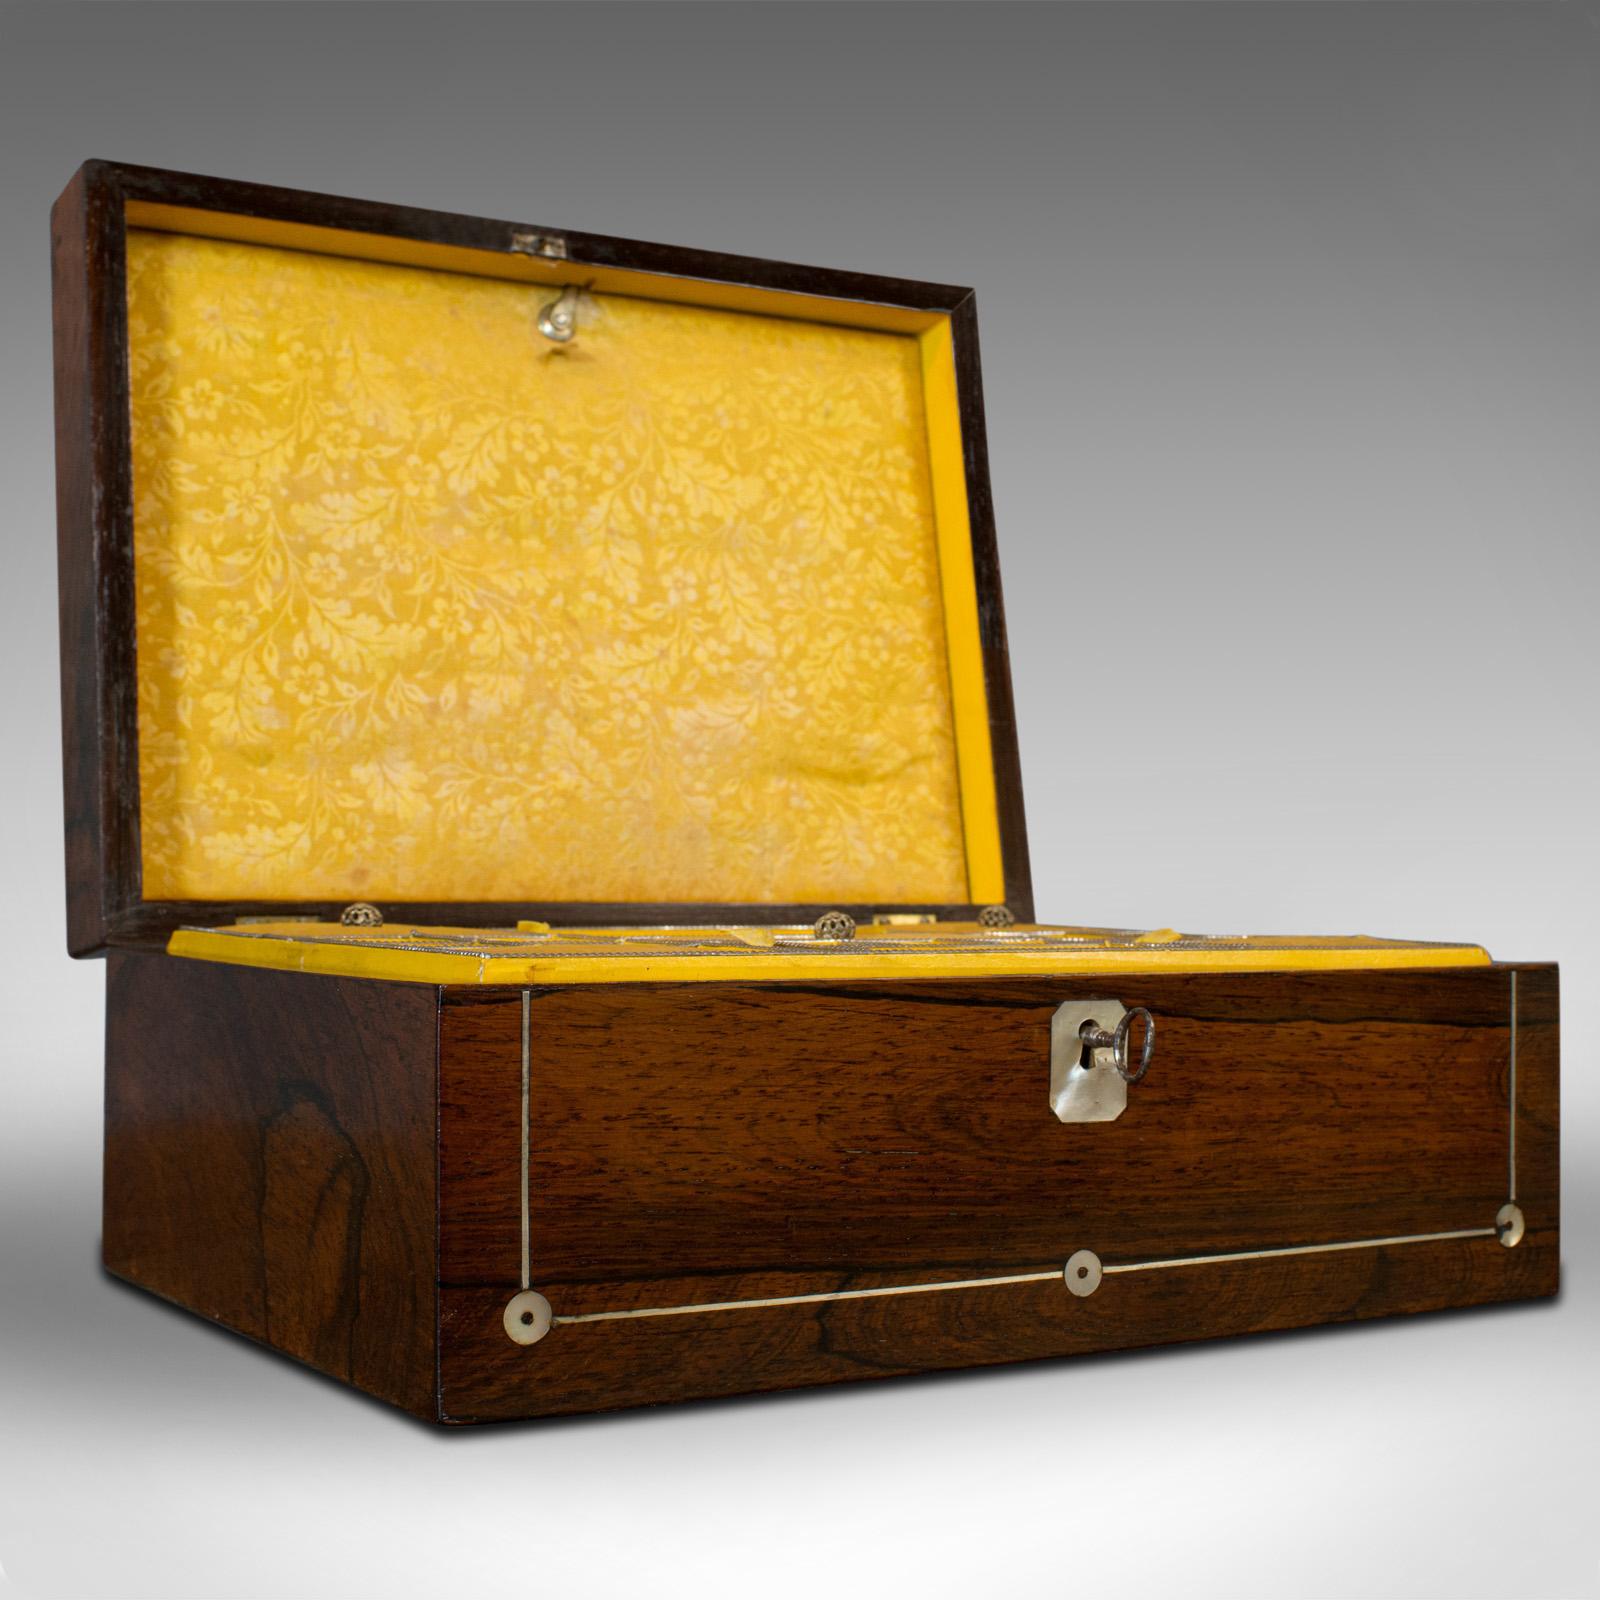 This is an antique jewellery box. An English, rosewood and mother of pearl sewing or haberdashery box, dating to the mid-Victorian period, circa 1870.

Beautiful jewelry box with arresting interior
Displays a desirable aged patina
Select